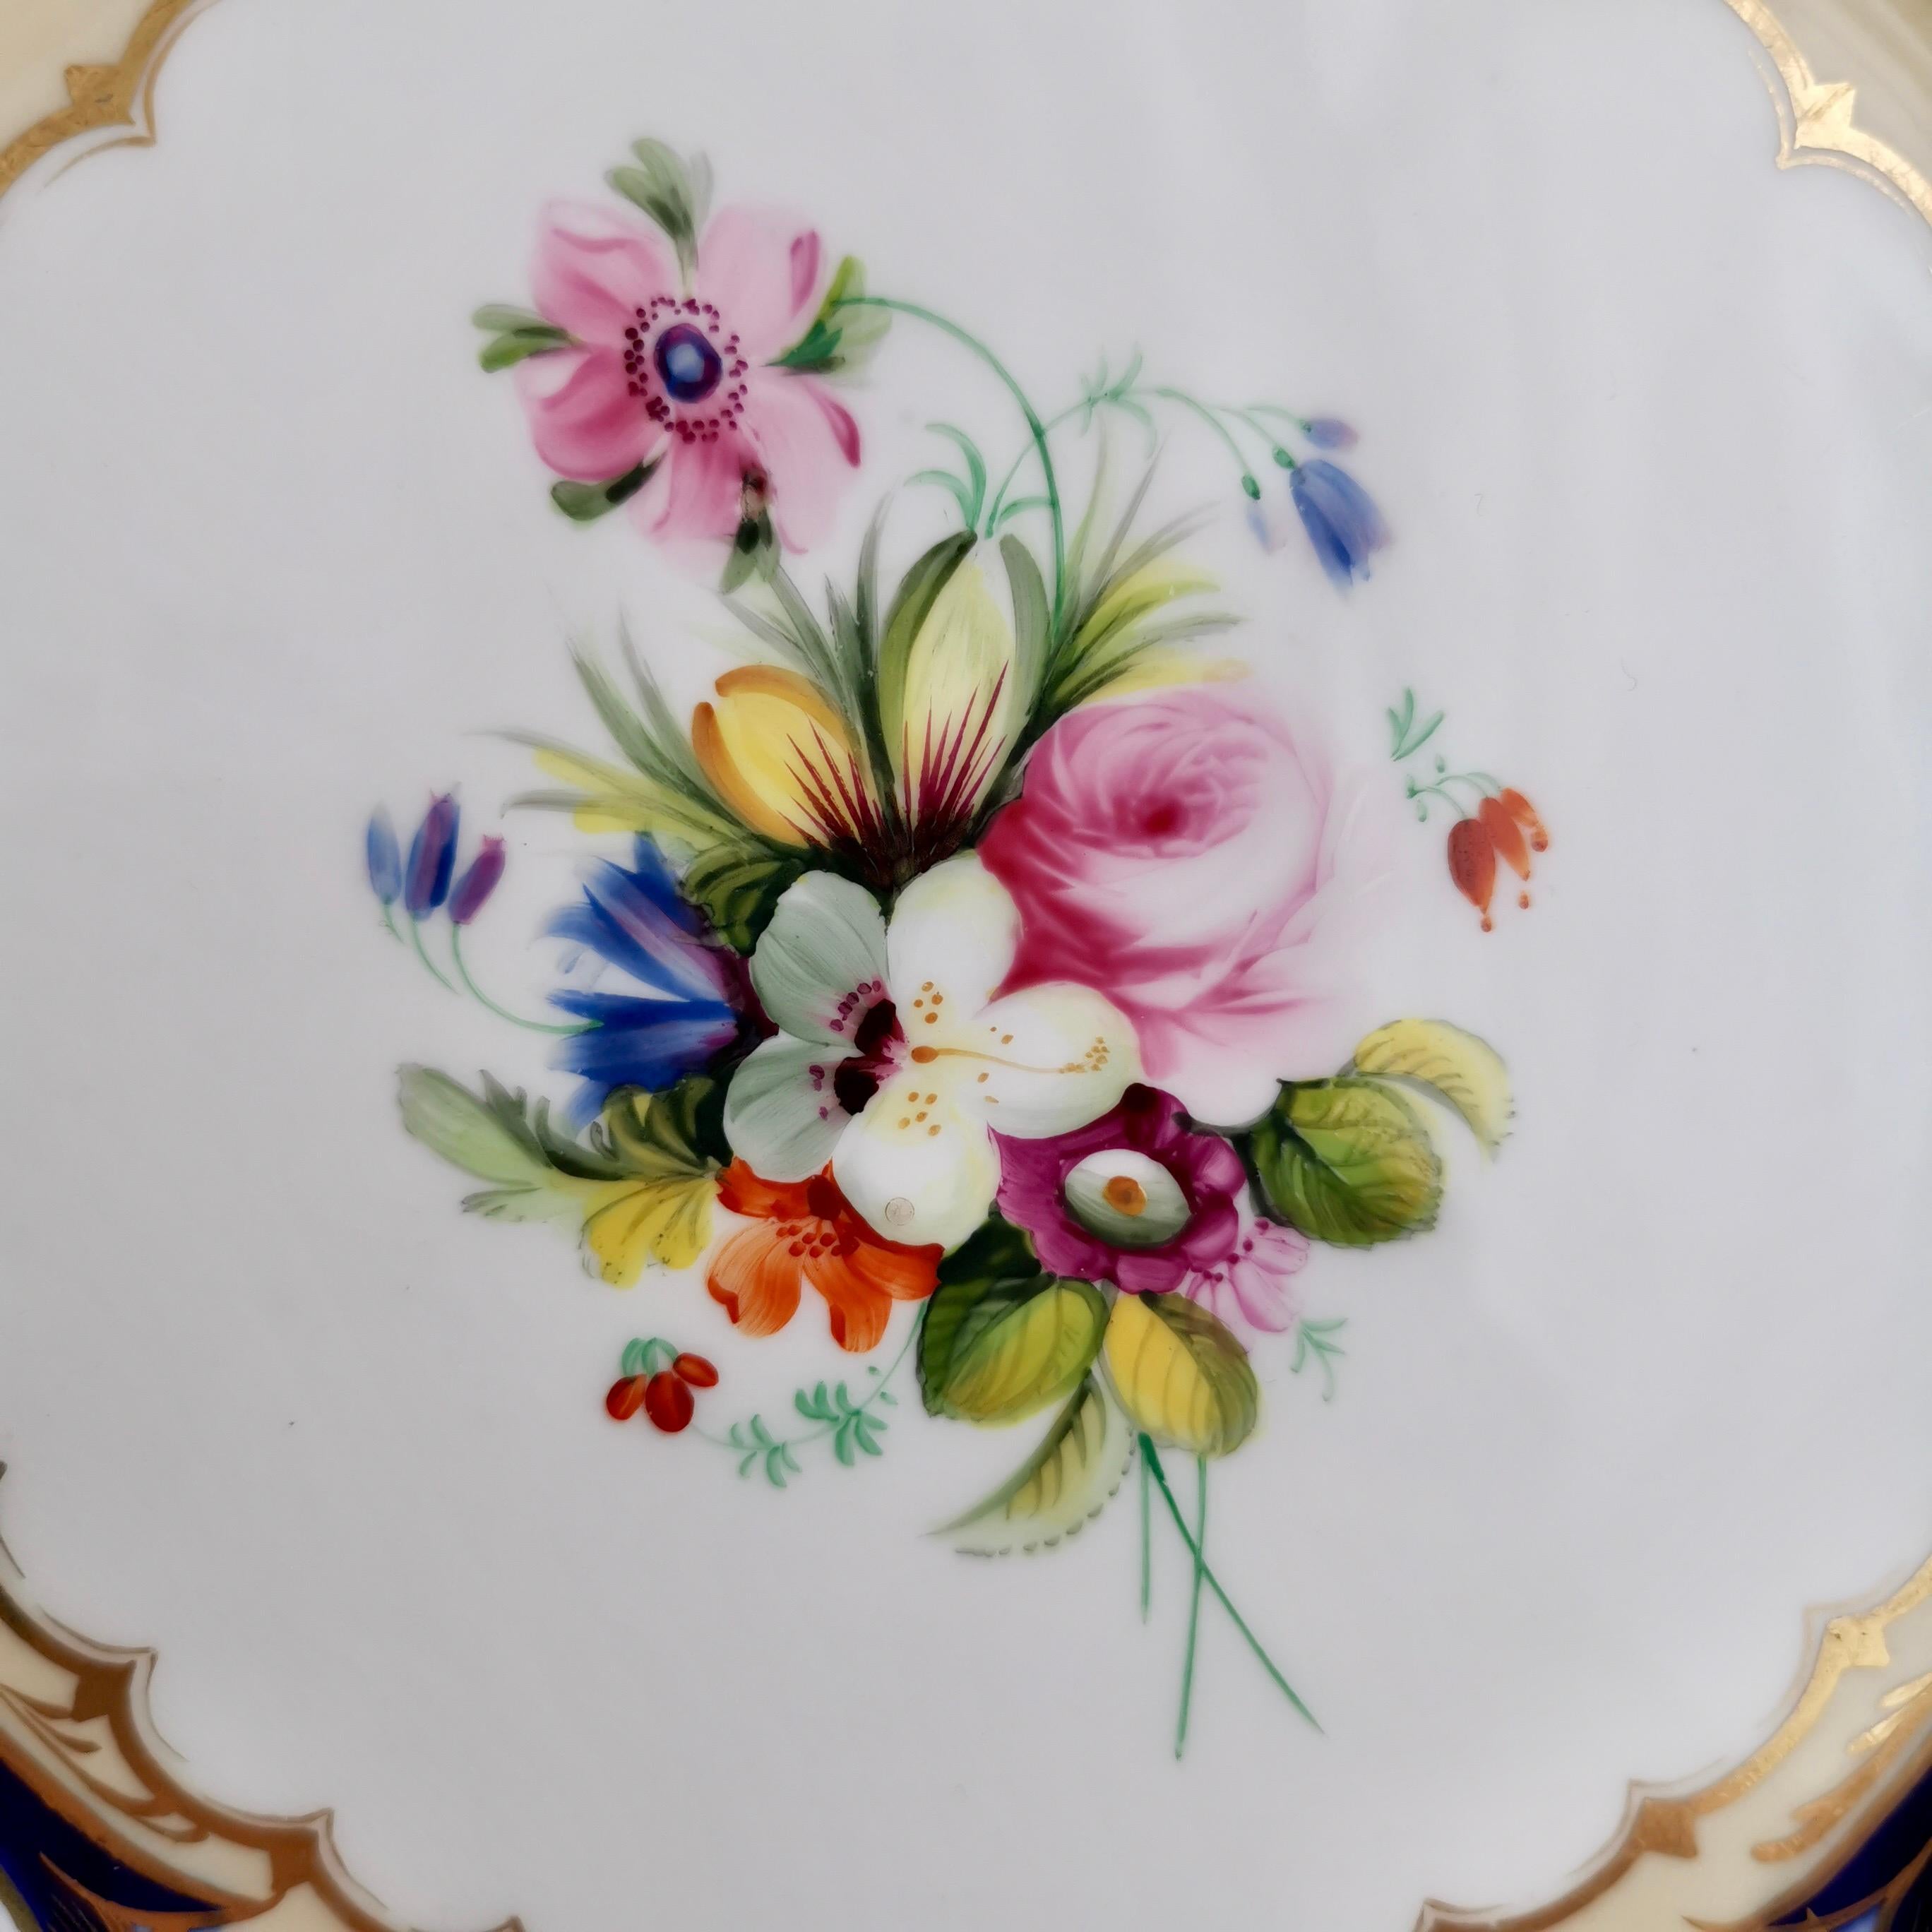 Hand-Painted Coalport John Rose & Co Coalbrookdale Plate, Rlowers by Brindley, ca 1841